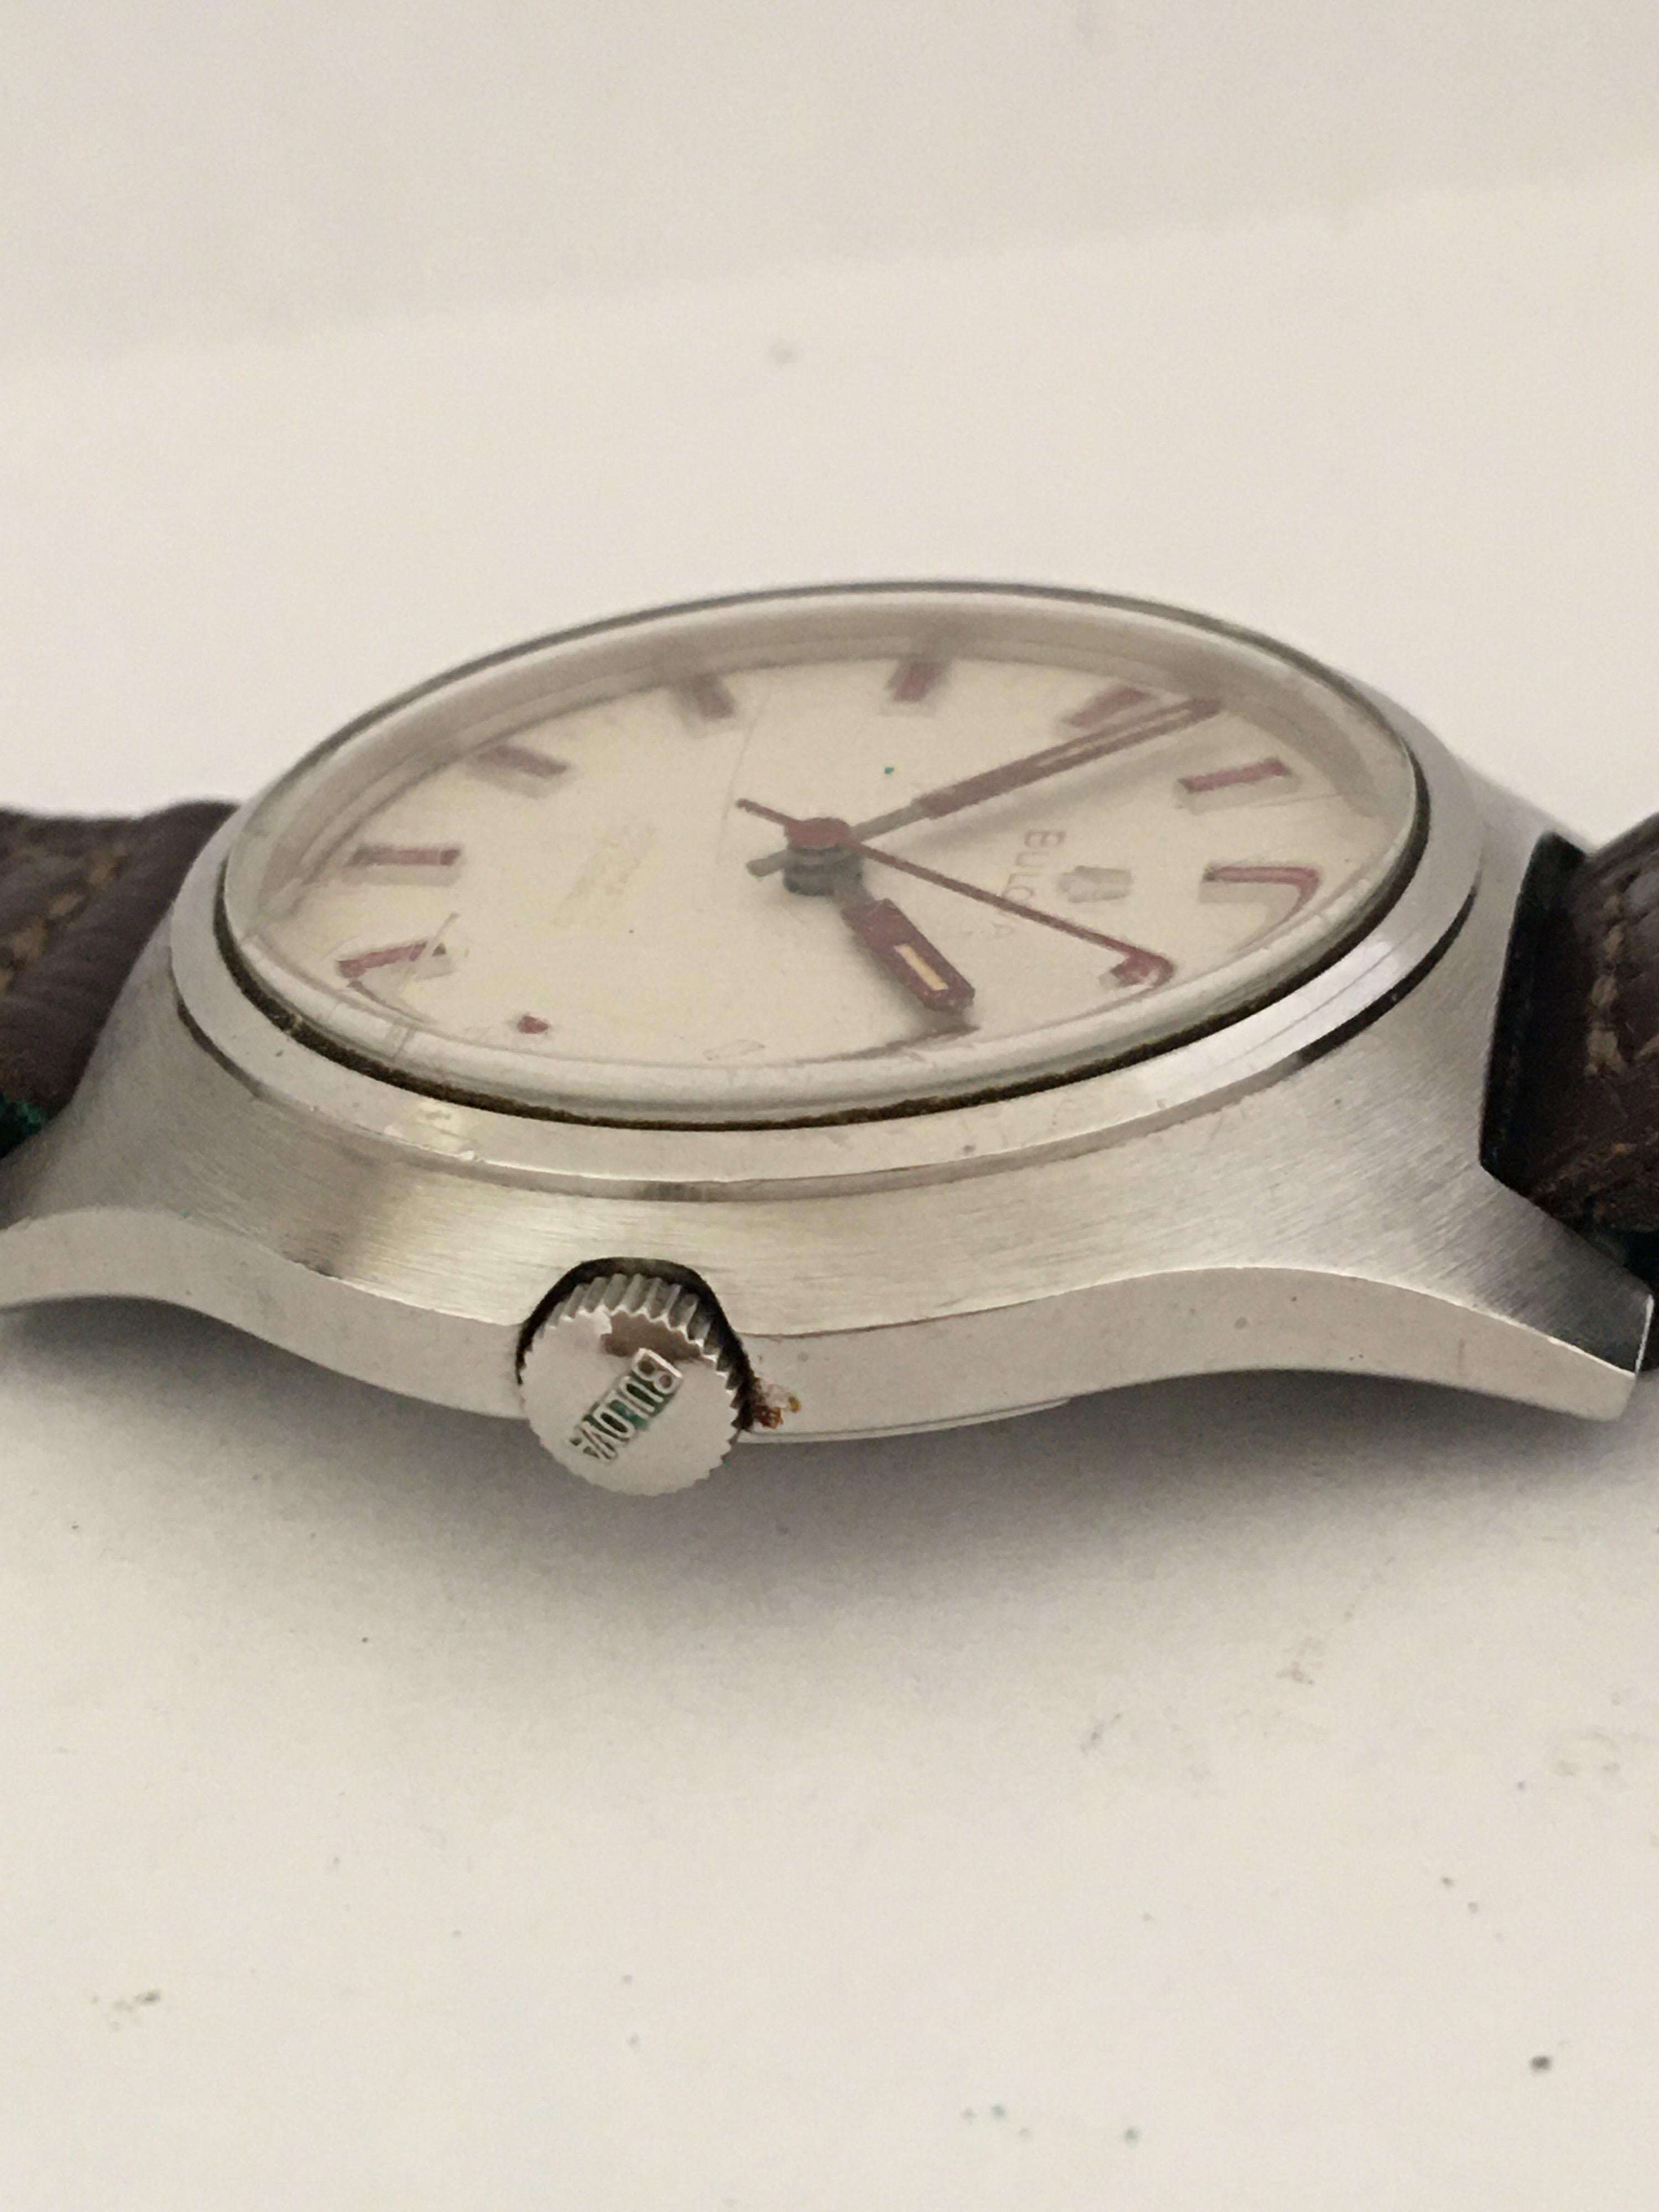 Women's or Men's Vintage 1970s Stainless Steel Automatic Bulova Watch For Sale